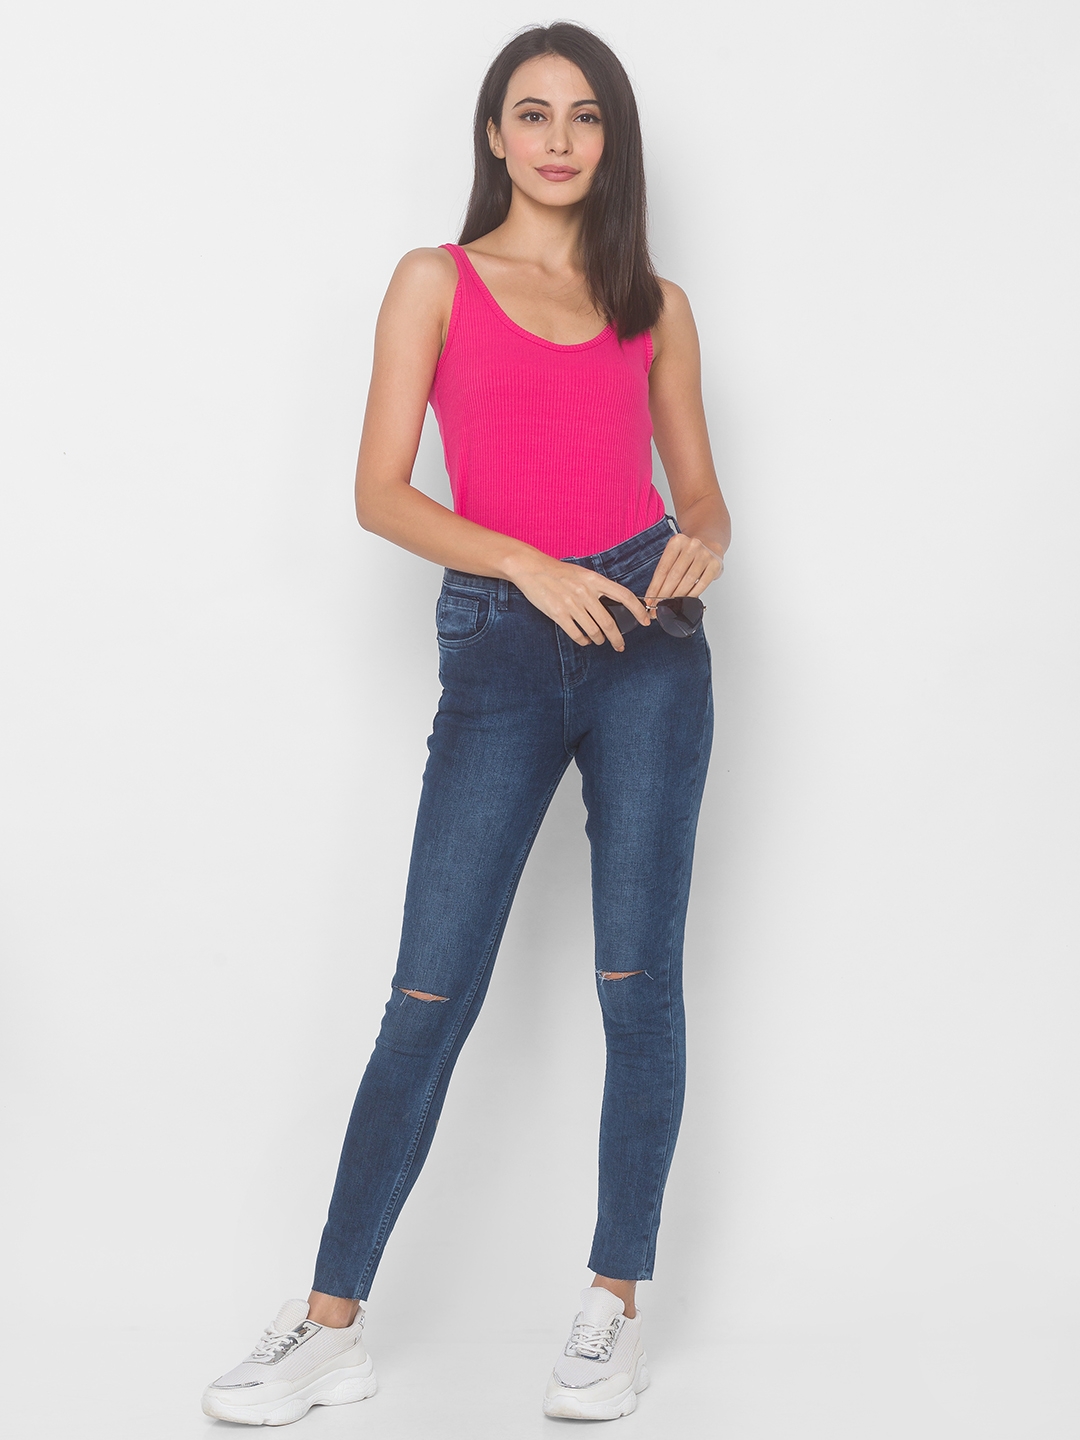 globus | Women's Blue Cotton Solid Ripped Jeans 1